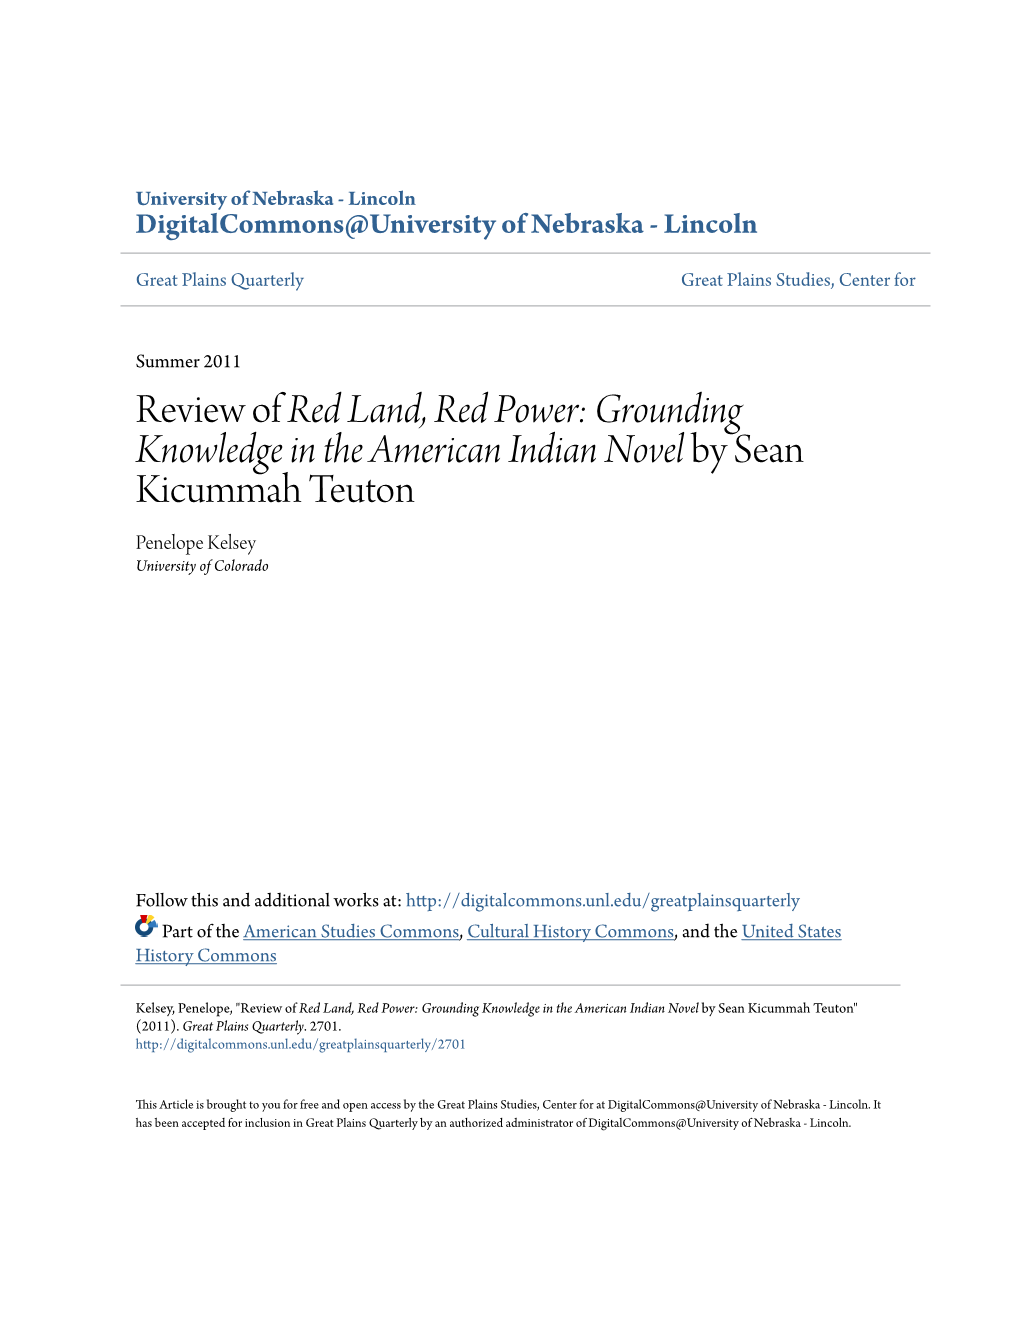 Review of Red Land, Red Power: Grounding Knowledge in the American Indian Novel by Sean Kicummah Teuton Penelope Kelsey University of Colorado